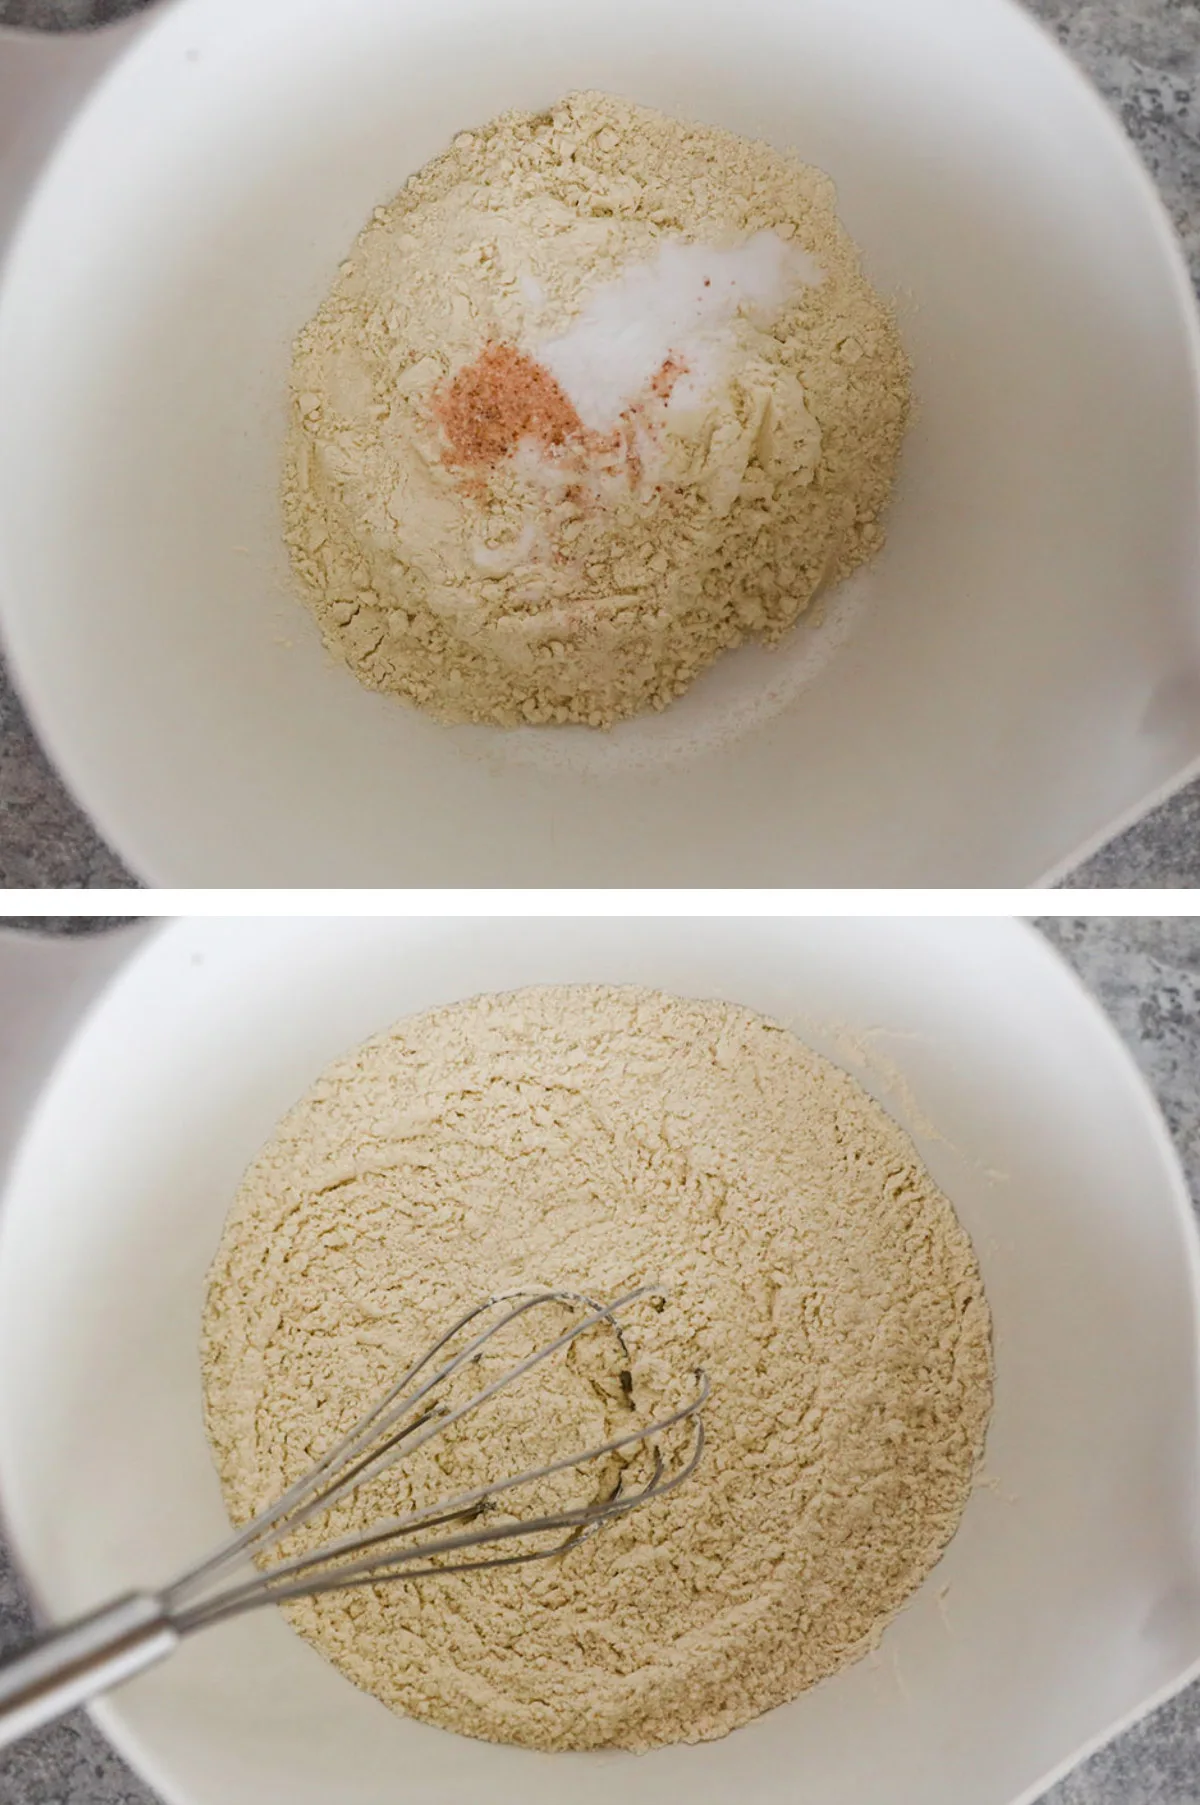 Two overhead images in one: 1. In a separate bowl flour, baking soda and salt are added. 2. Ingredients are mixed. 